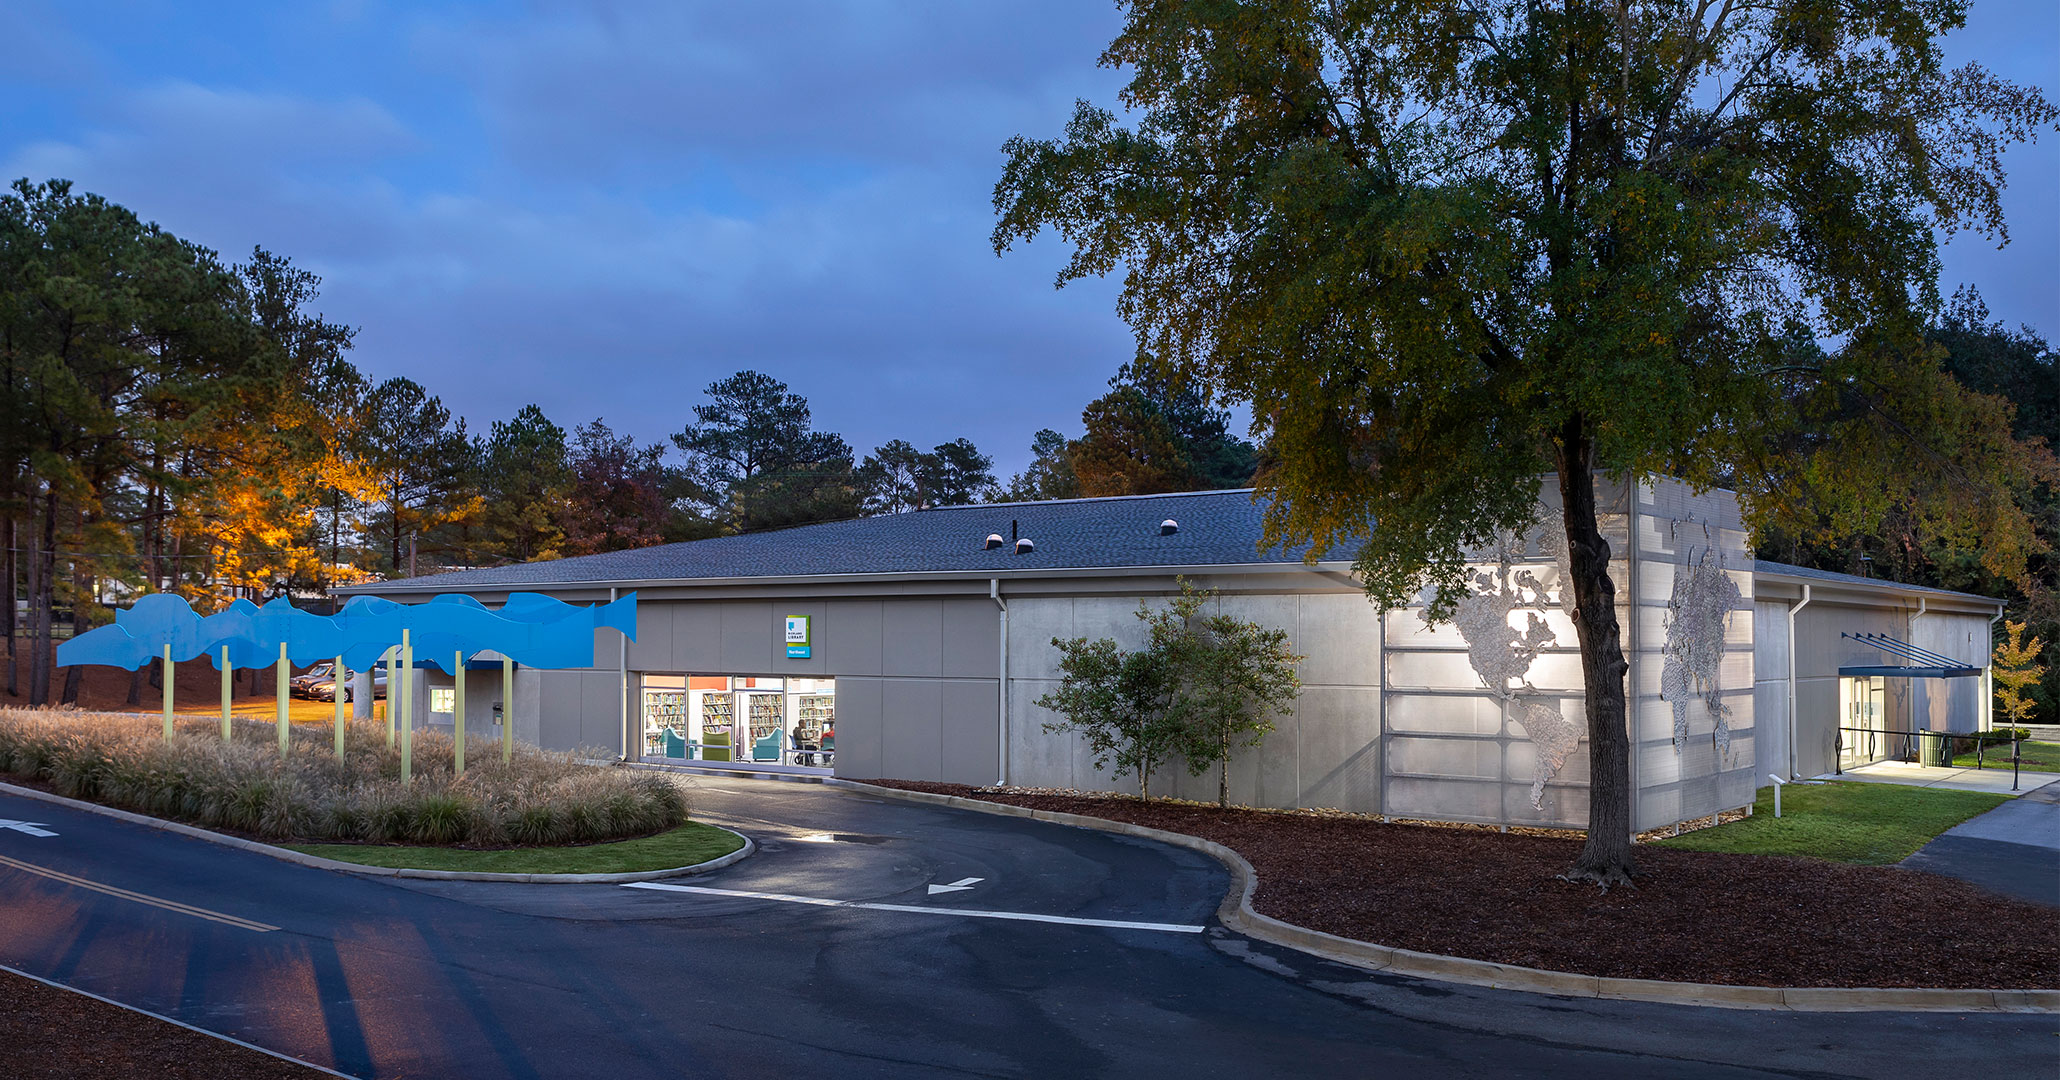 Boudreaux architects worked with the Richland Library to update the exterior and design the interiors at the Richland Library Northeast Branch Location.